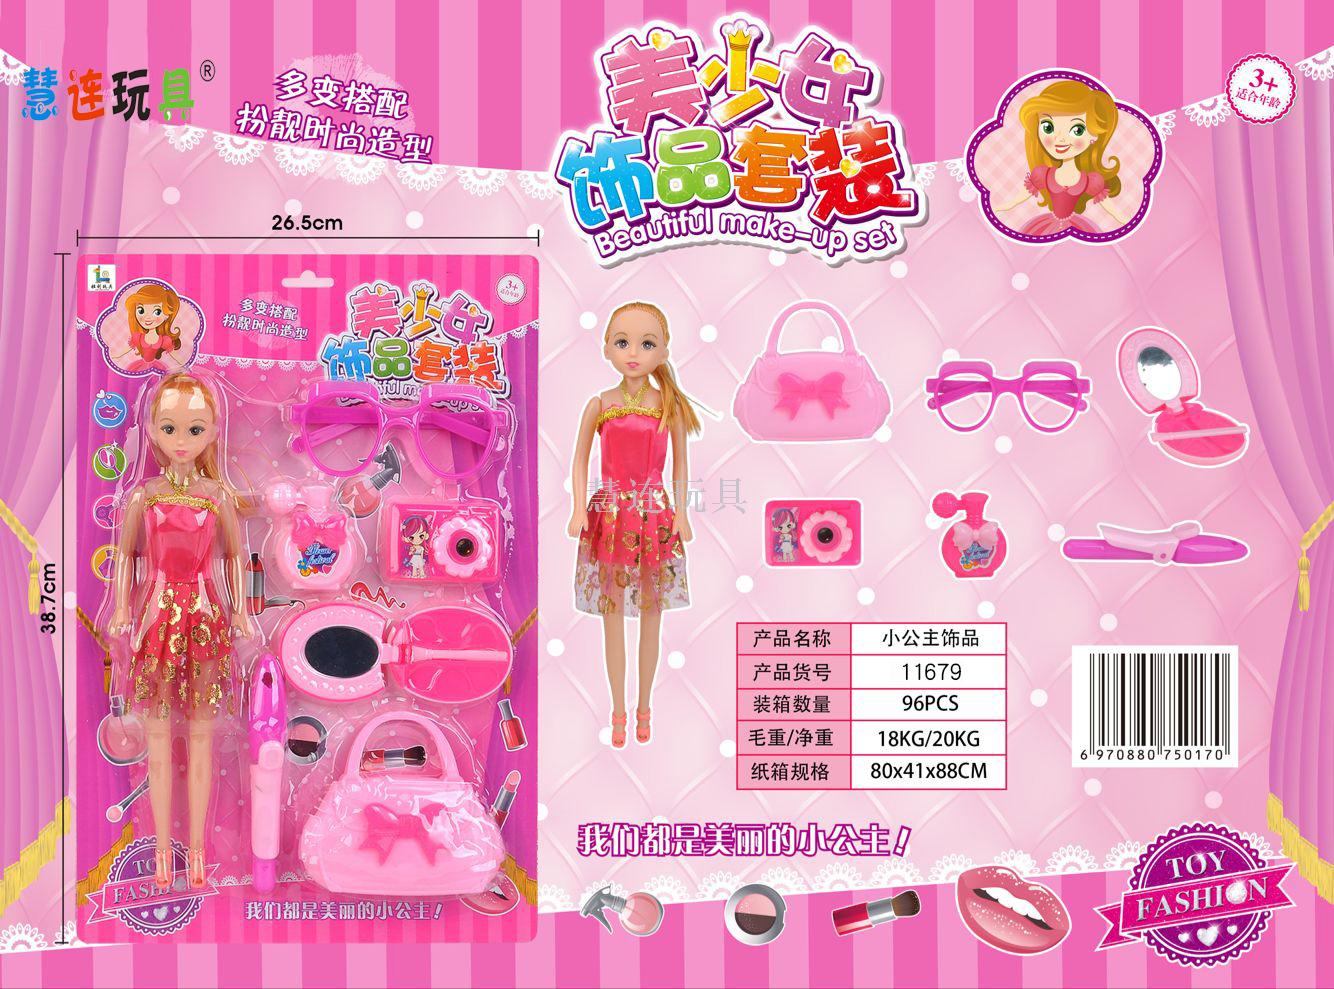 barbie with hair accessories